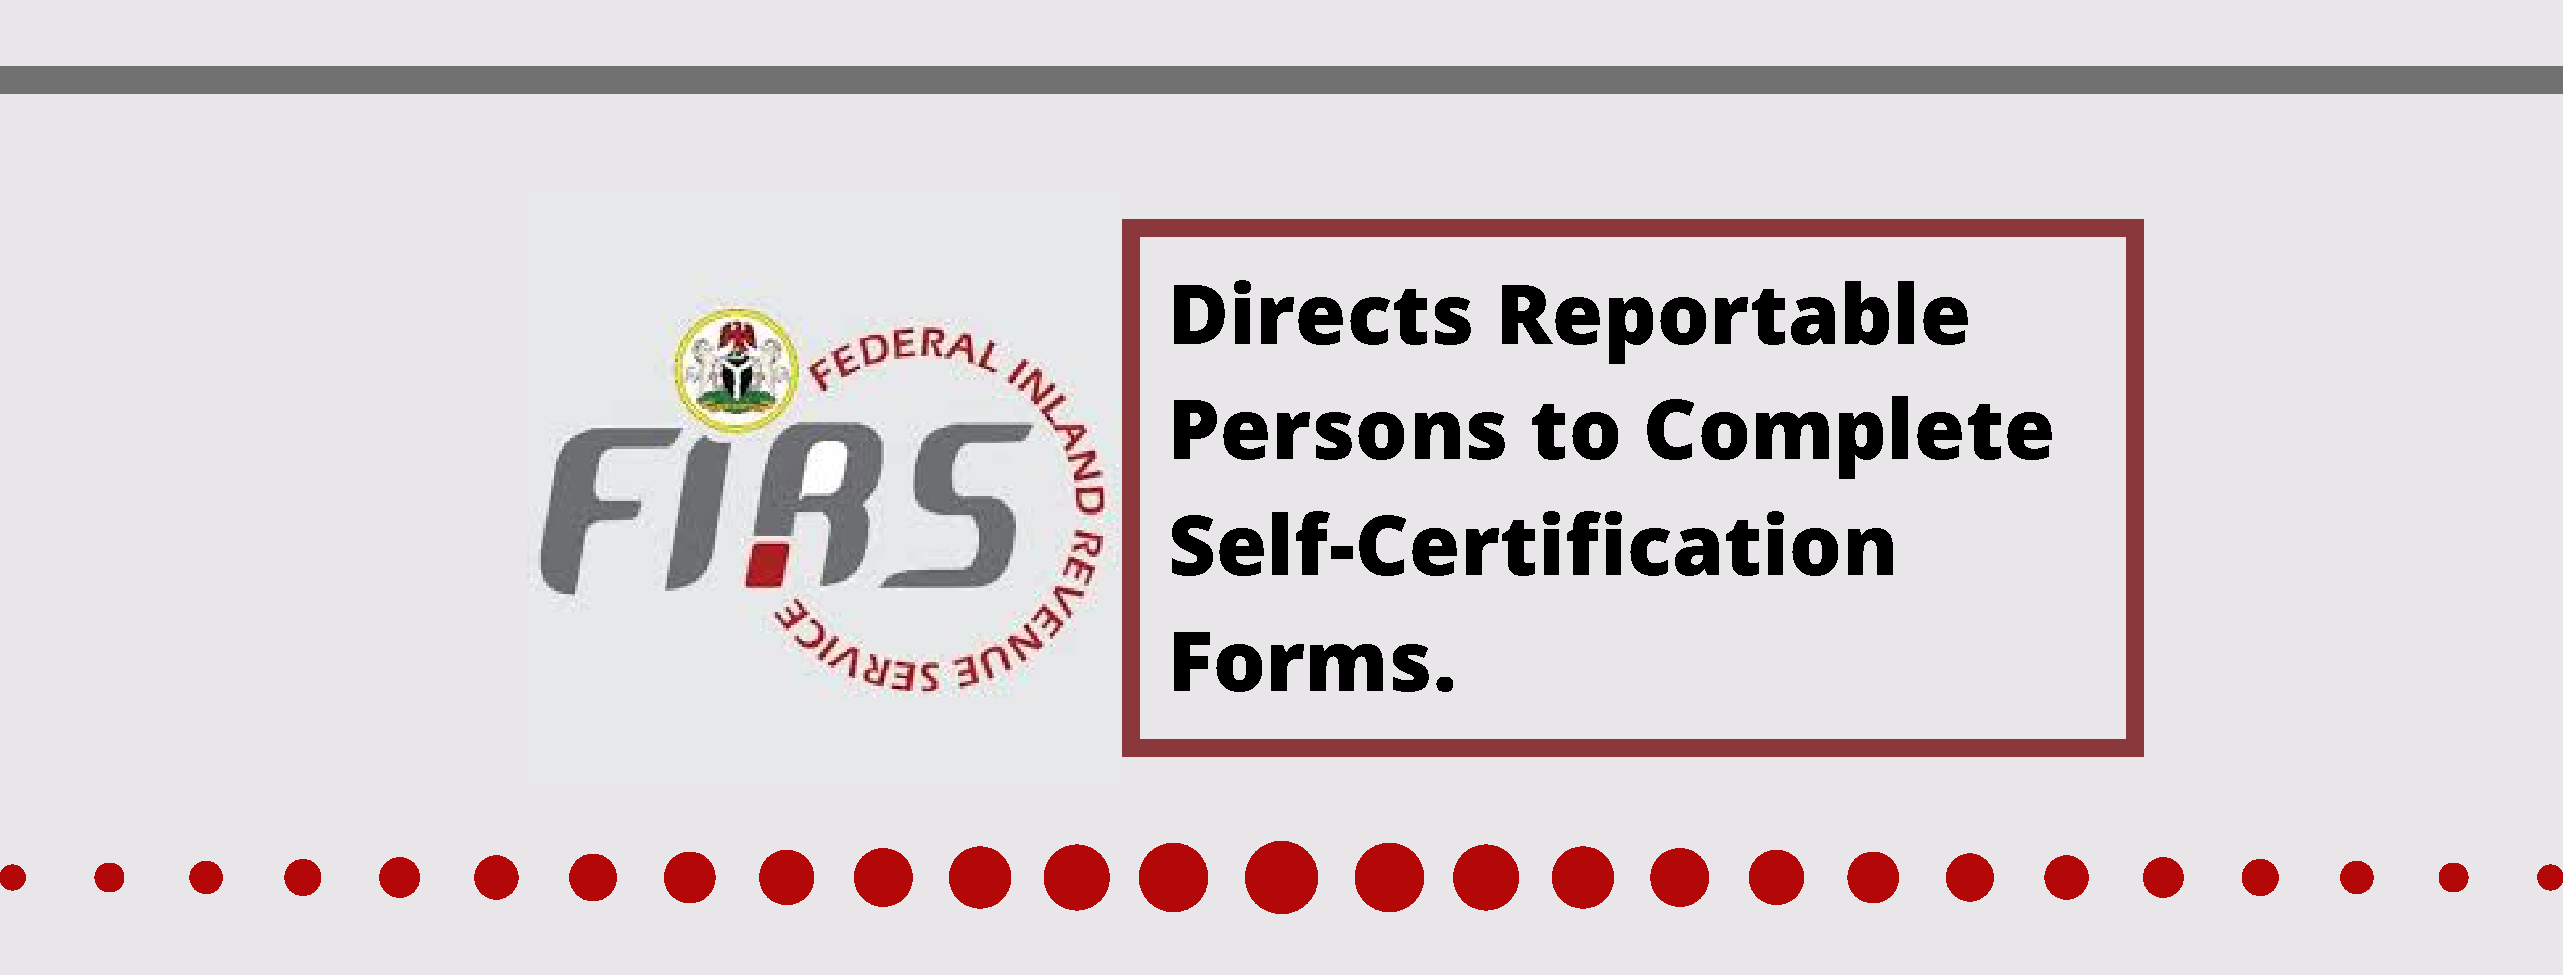 FIRS Directs Reportable Persons to Complete Self-Certification Forms